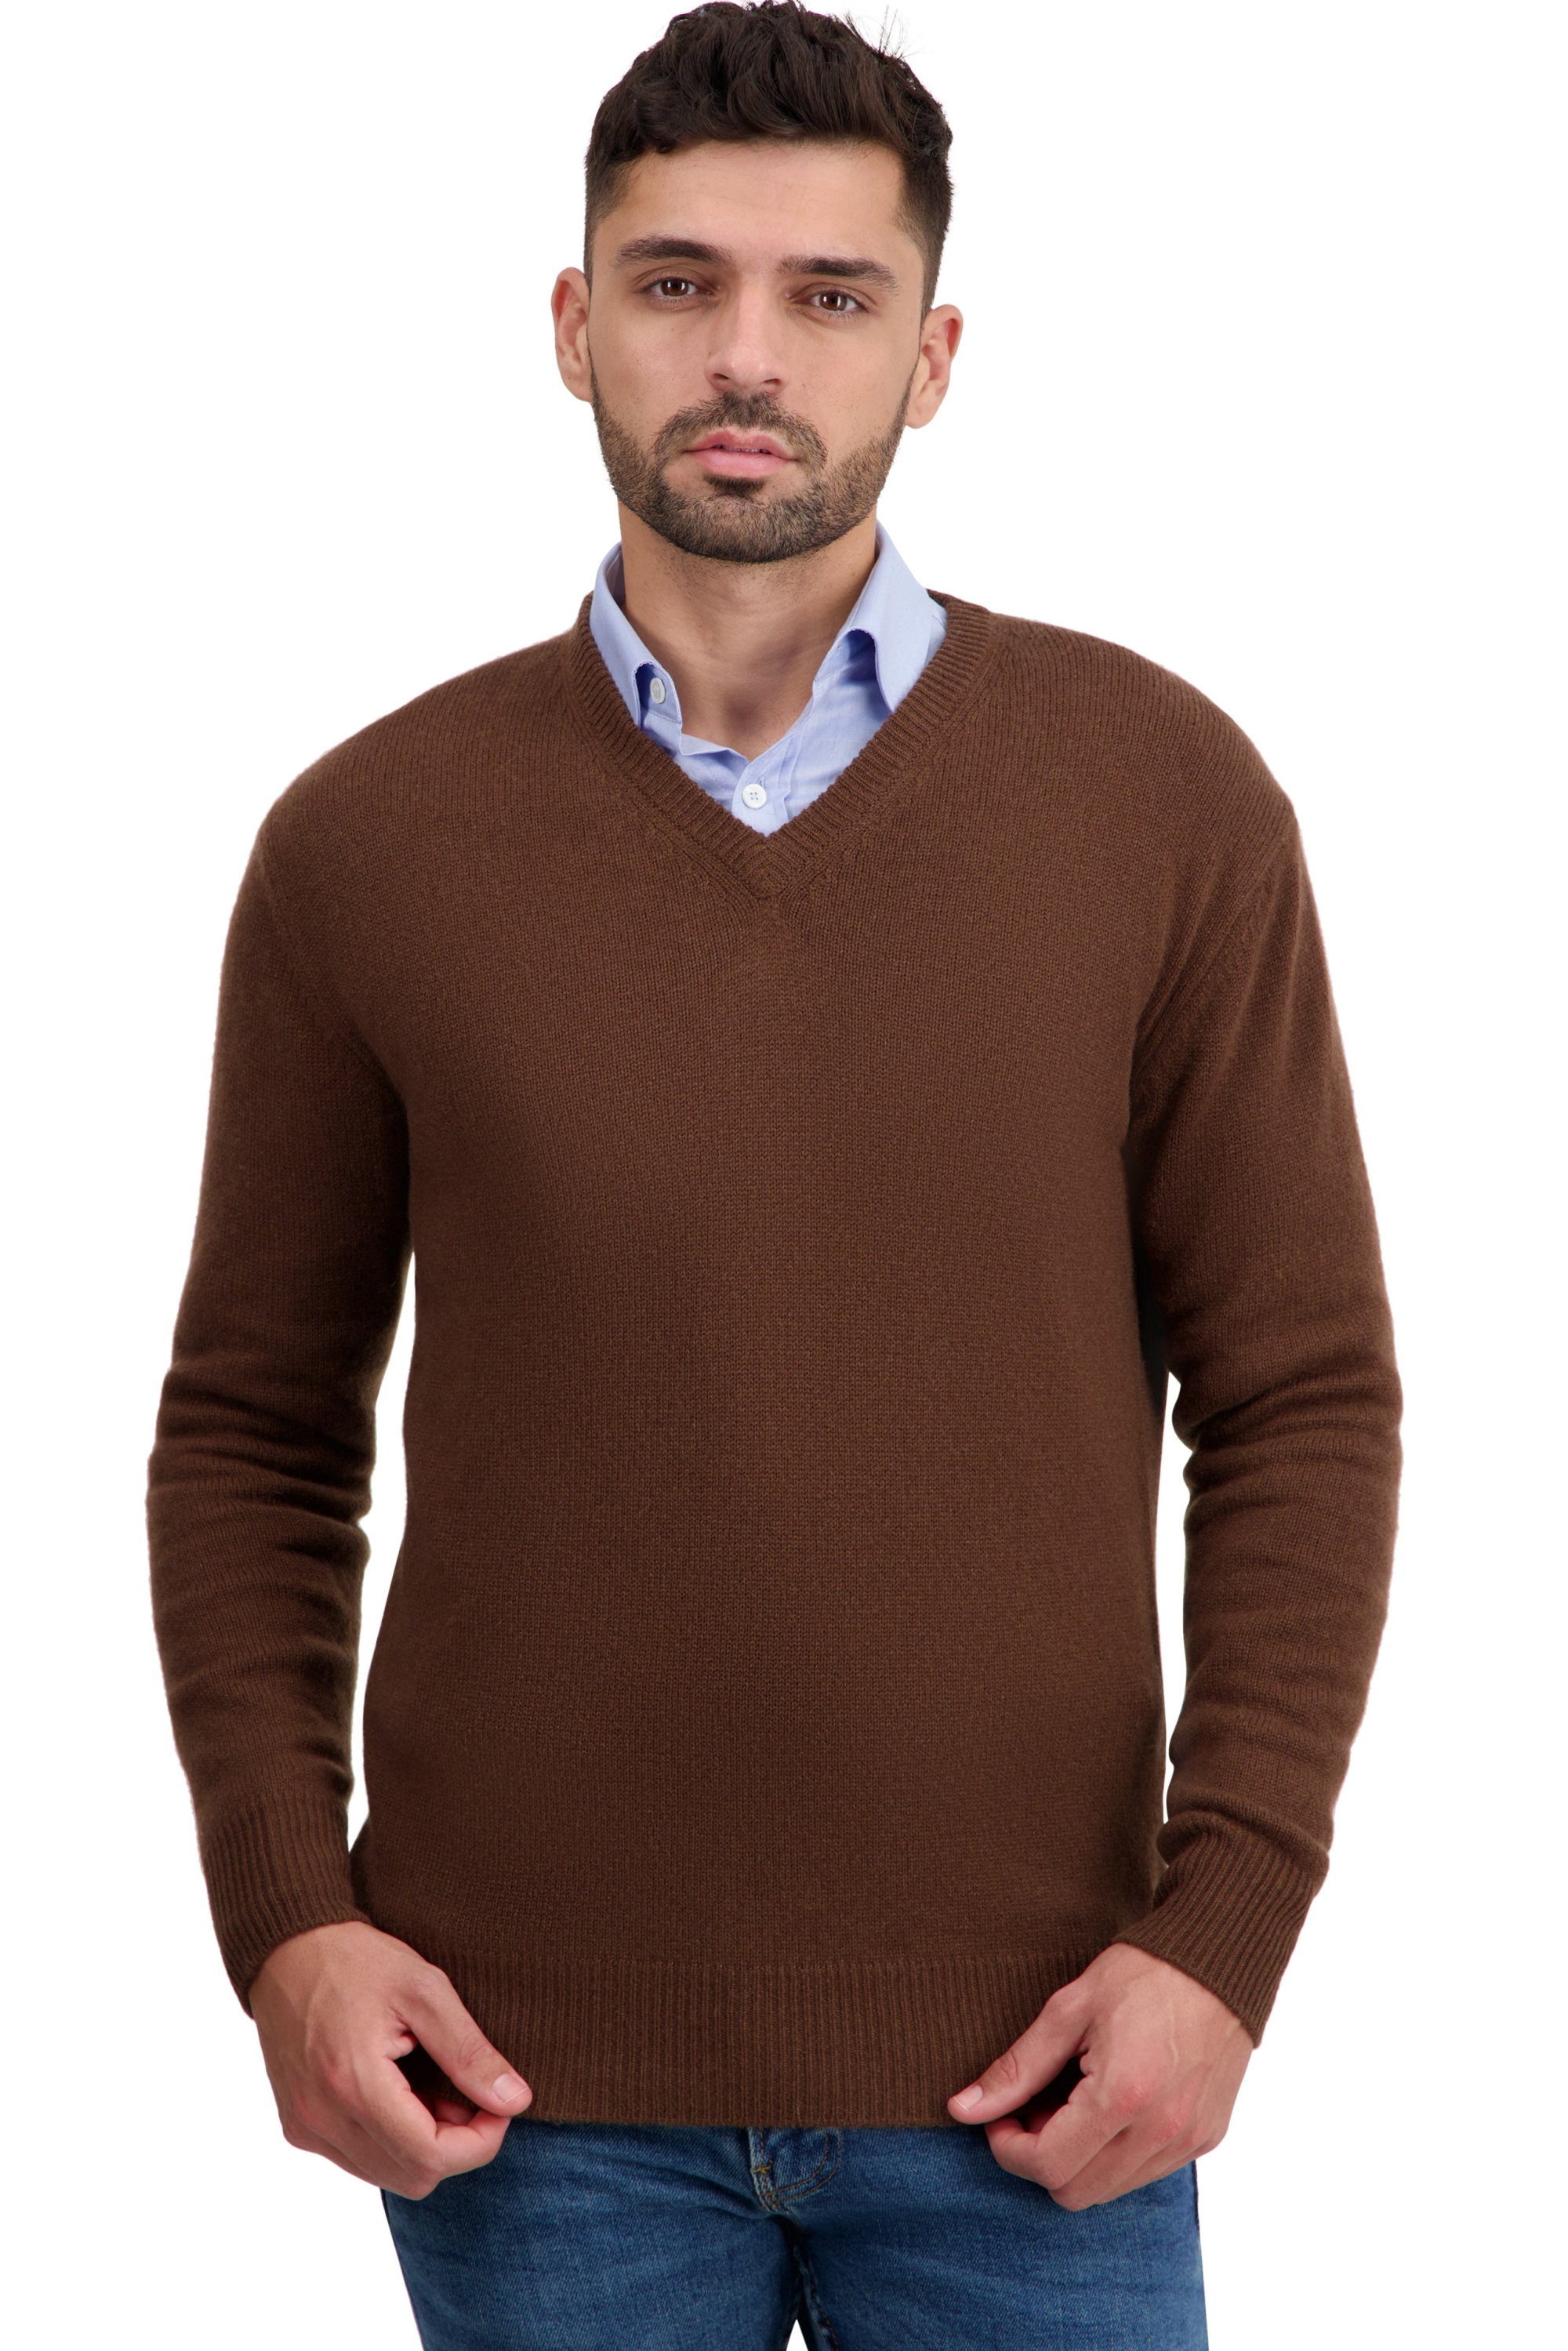 Cashmere men basic sweaters at low prices tour first dark camel xl